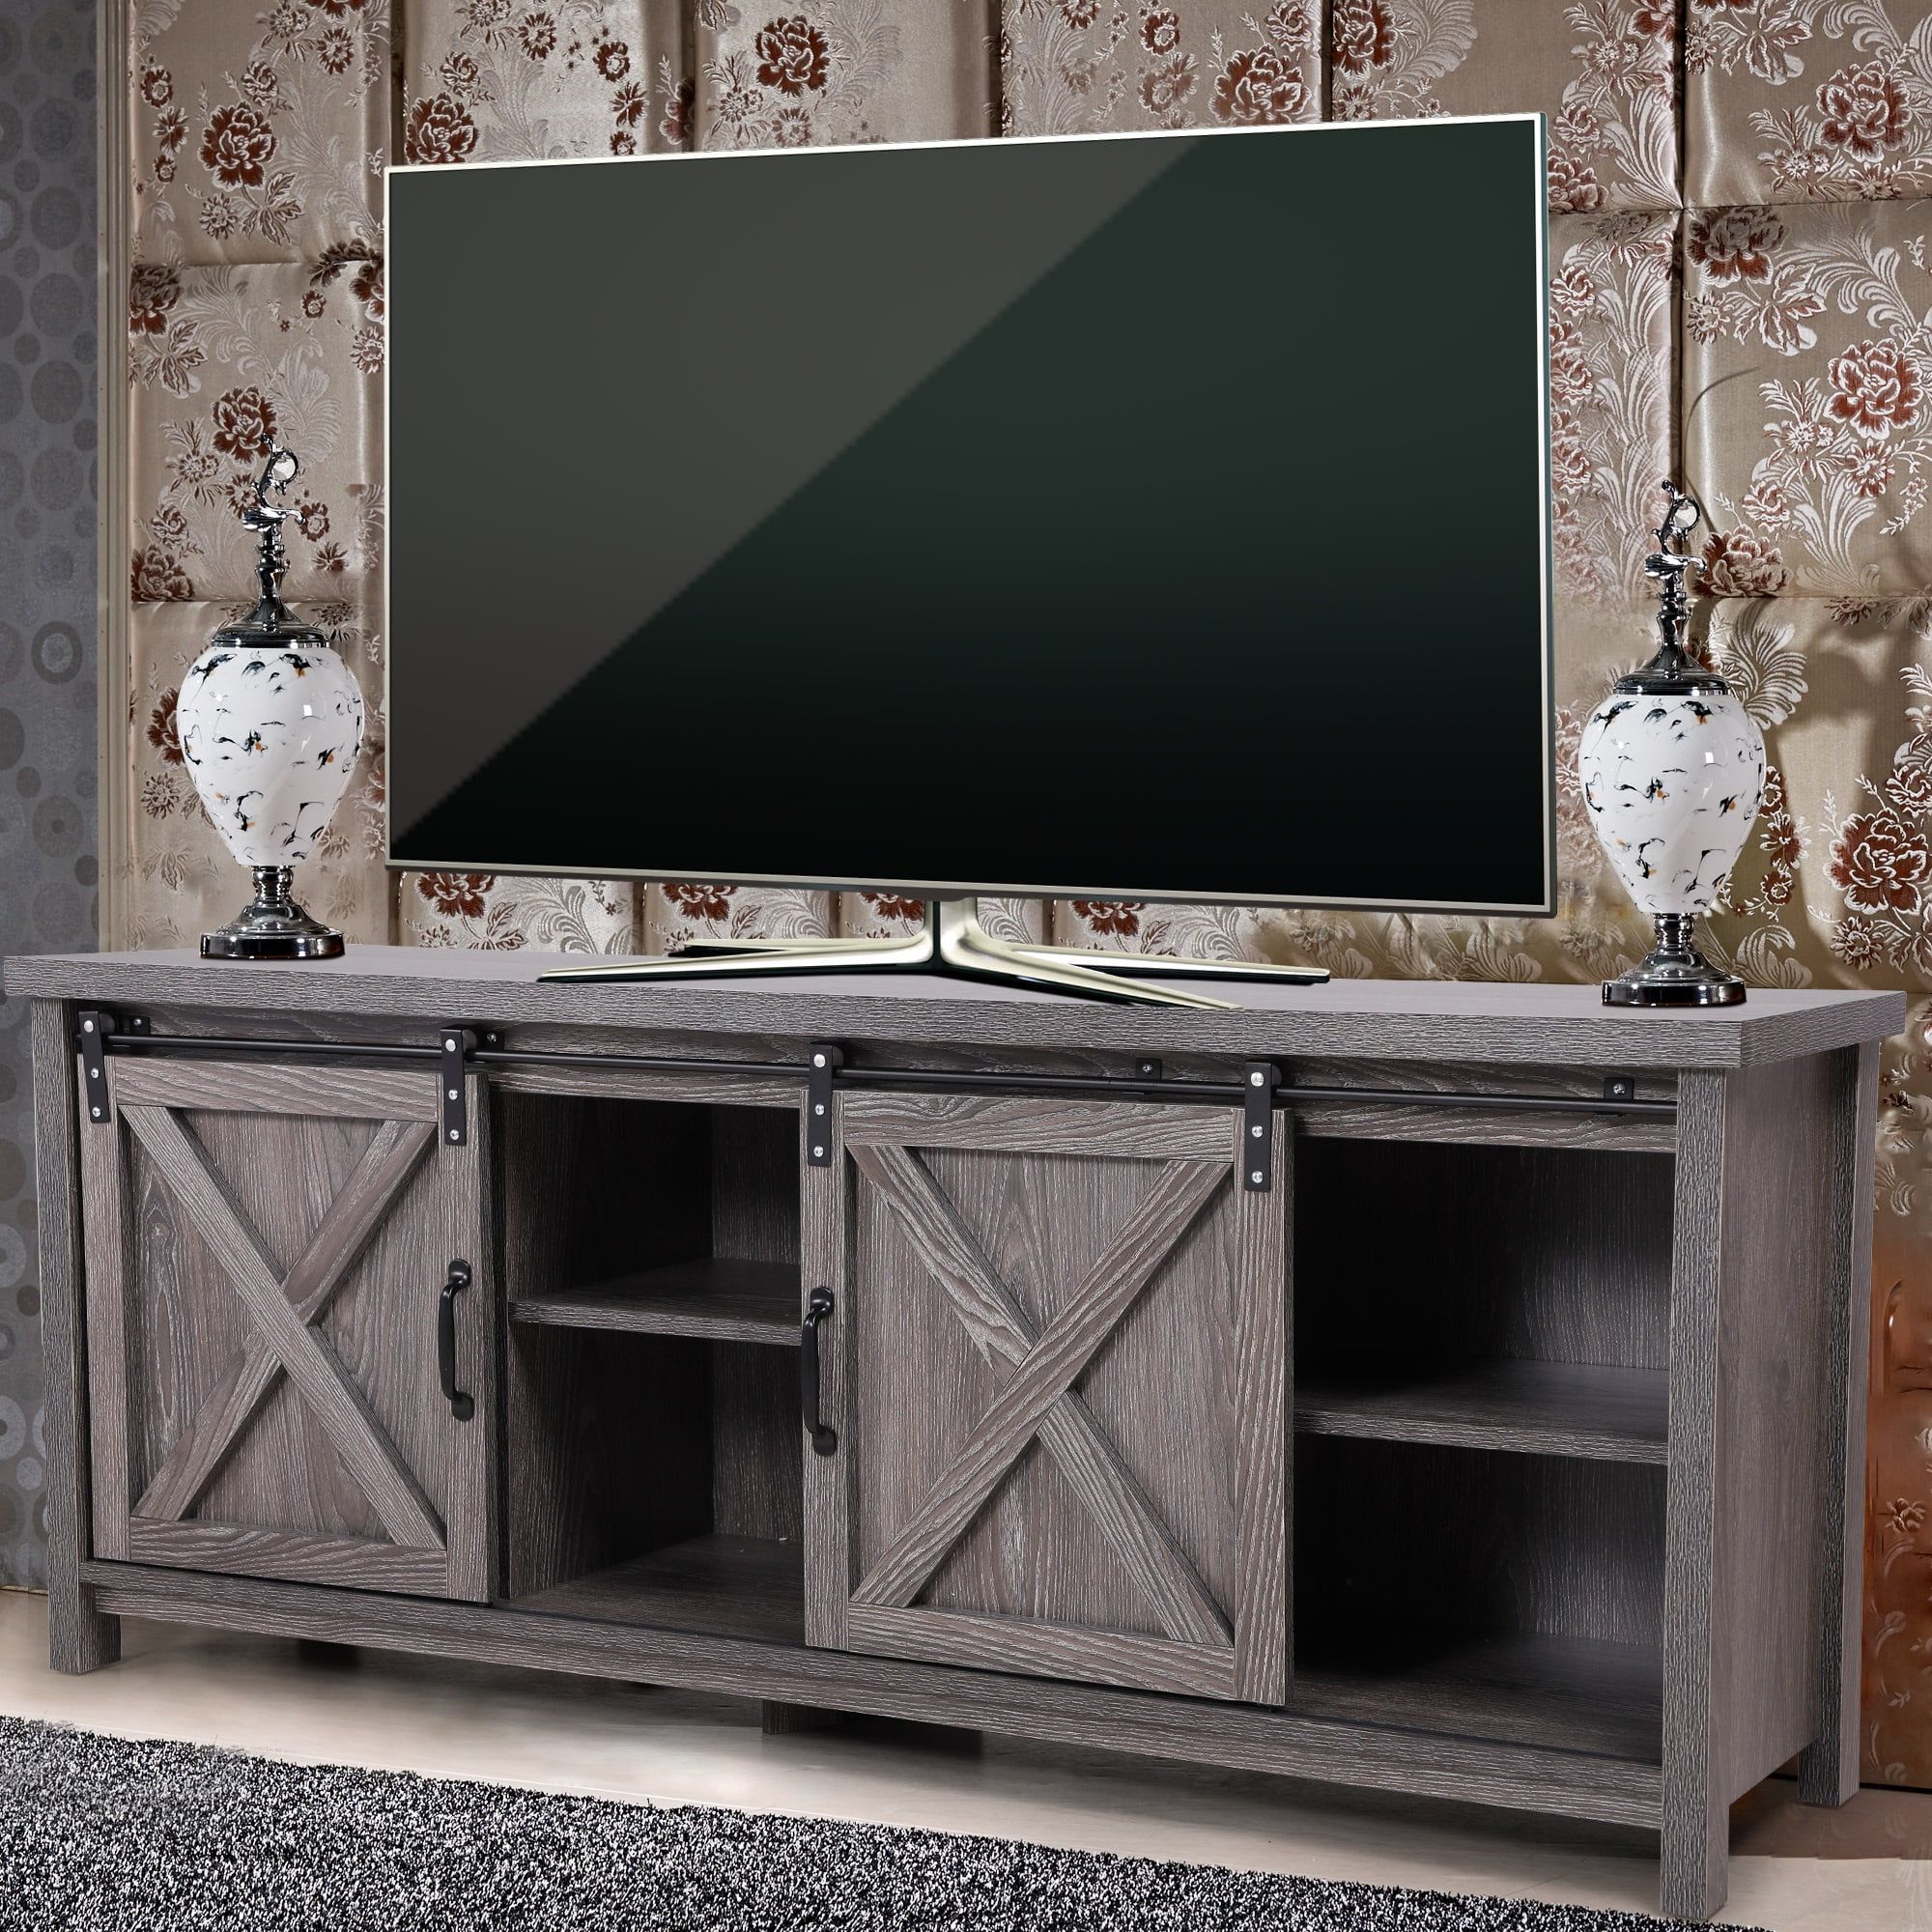 Jaxpety 58" Farmhouse Sliding Barn Door Tv Stand For Tvs Up To 65 In Most Recent Farmhouse Stands For Tvs (View 4 of 15)